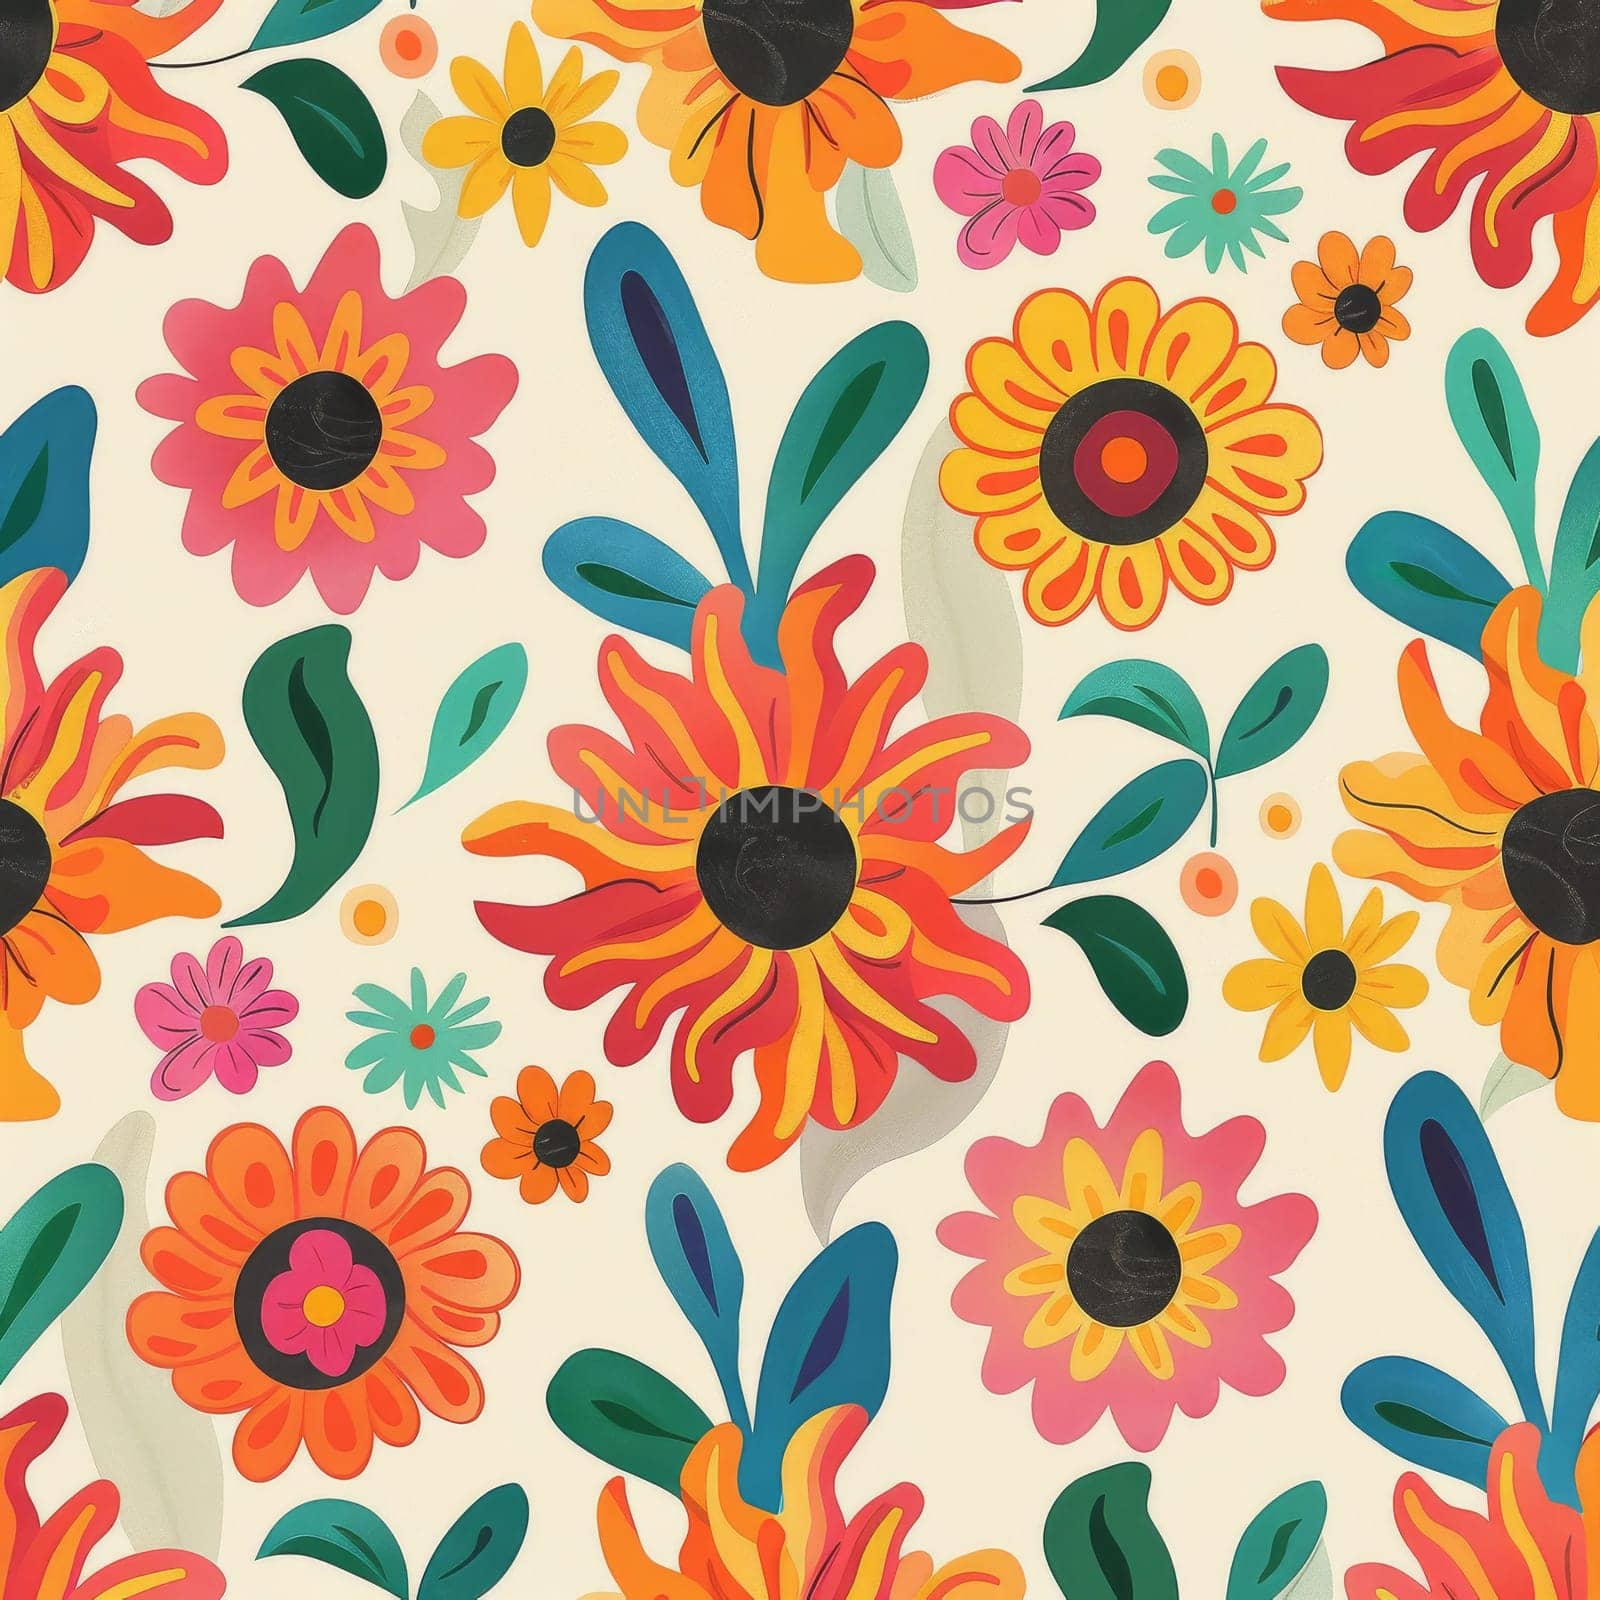 A colorful floral pattern with suns and leaves. The flowers are in various colors and sizes, and the suns are scattered throughout the design. Scene is cheerful and vibrant, with a sense of nature